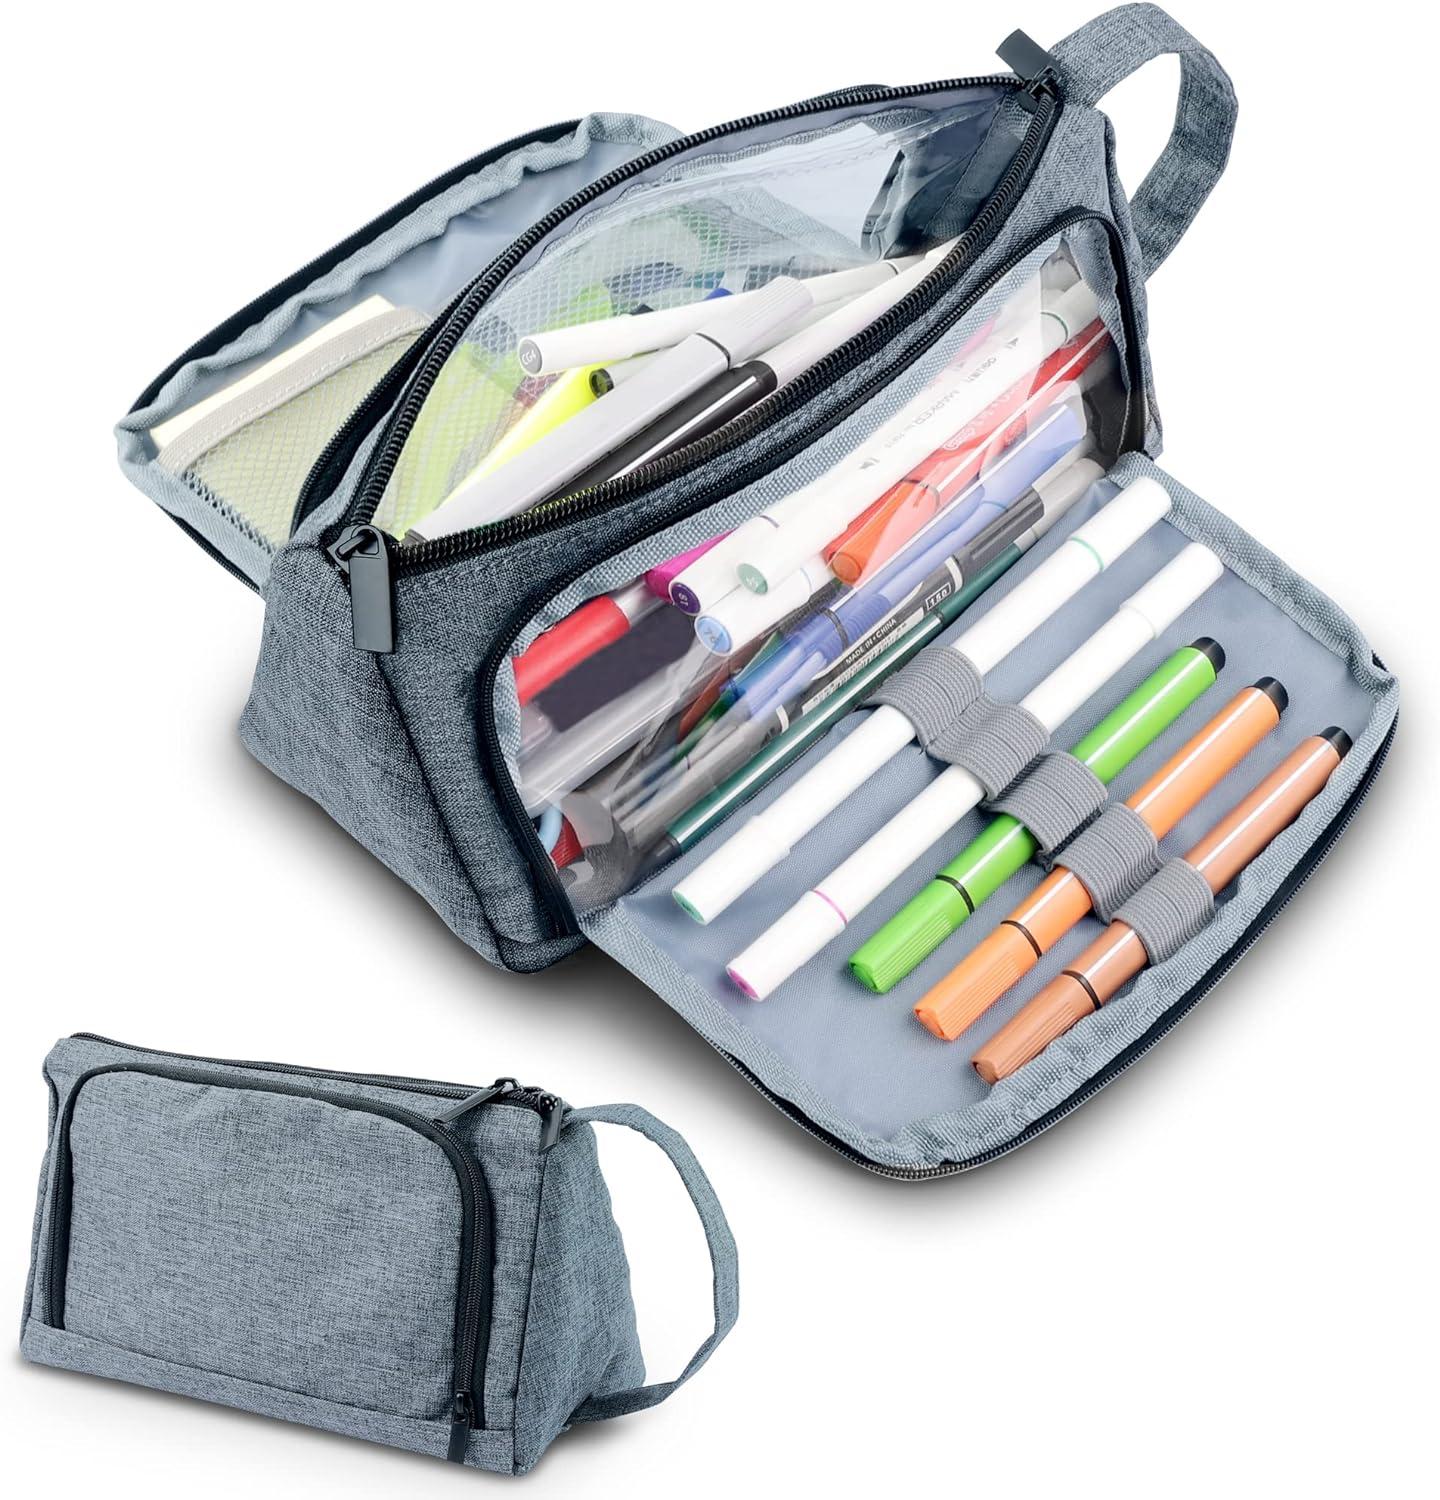 HOOMIL Pencil Case Large Pencil Bag Simple Pencil Case With Compartments Middle School College Office Organizer For Students Girls Boys Teen Grey